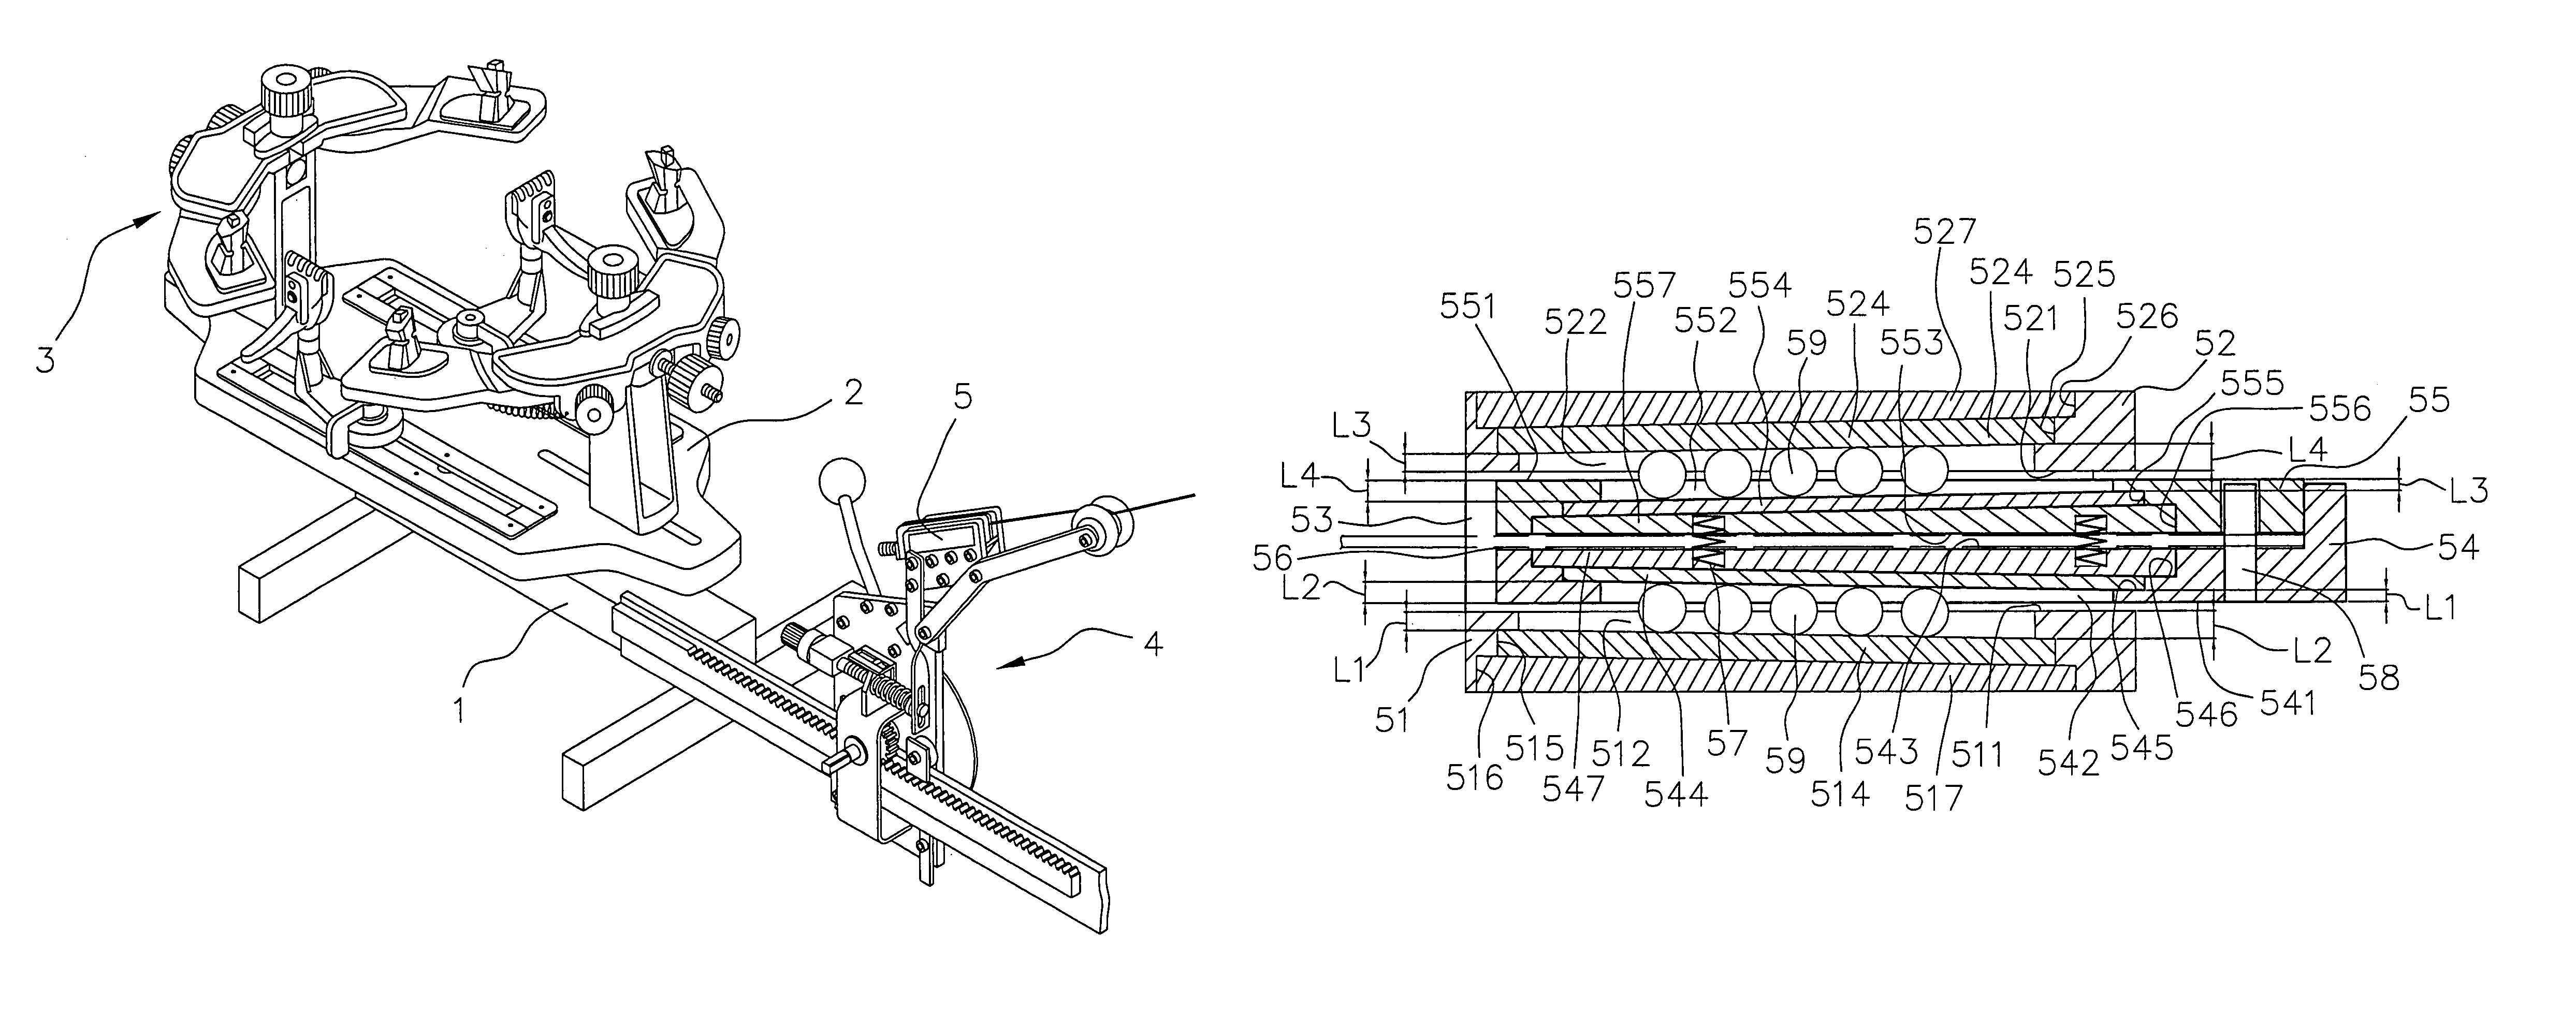 String pulling head structure of a racket stringer